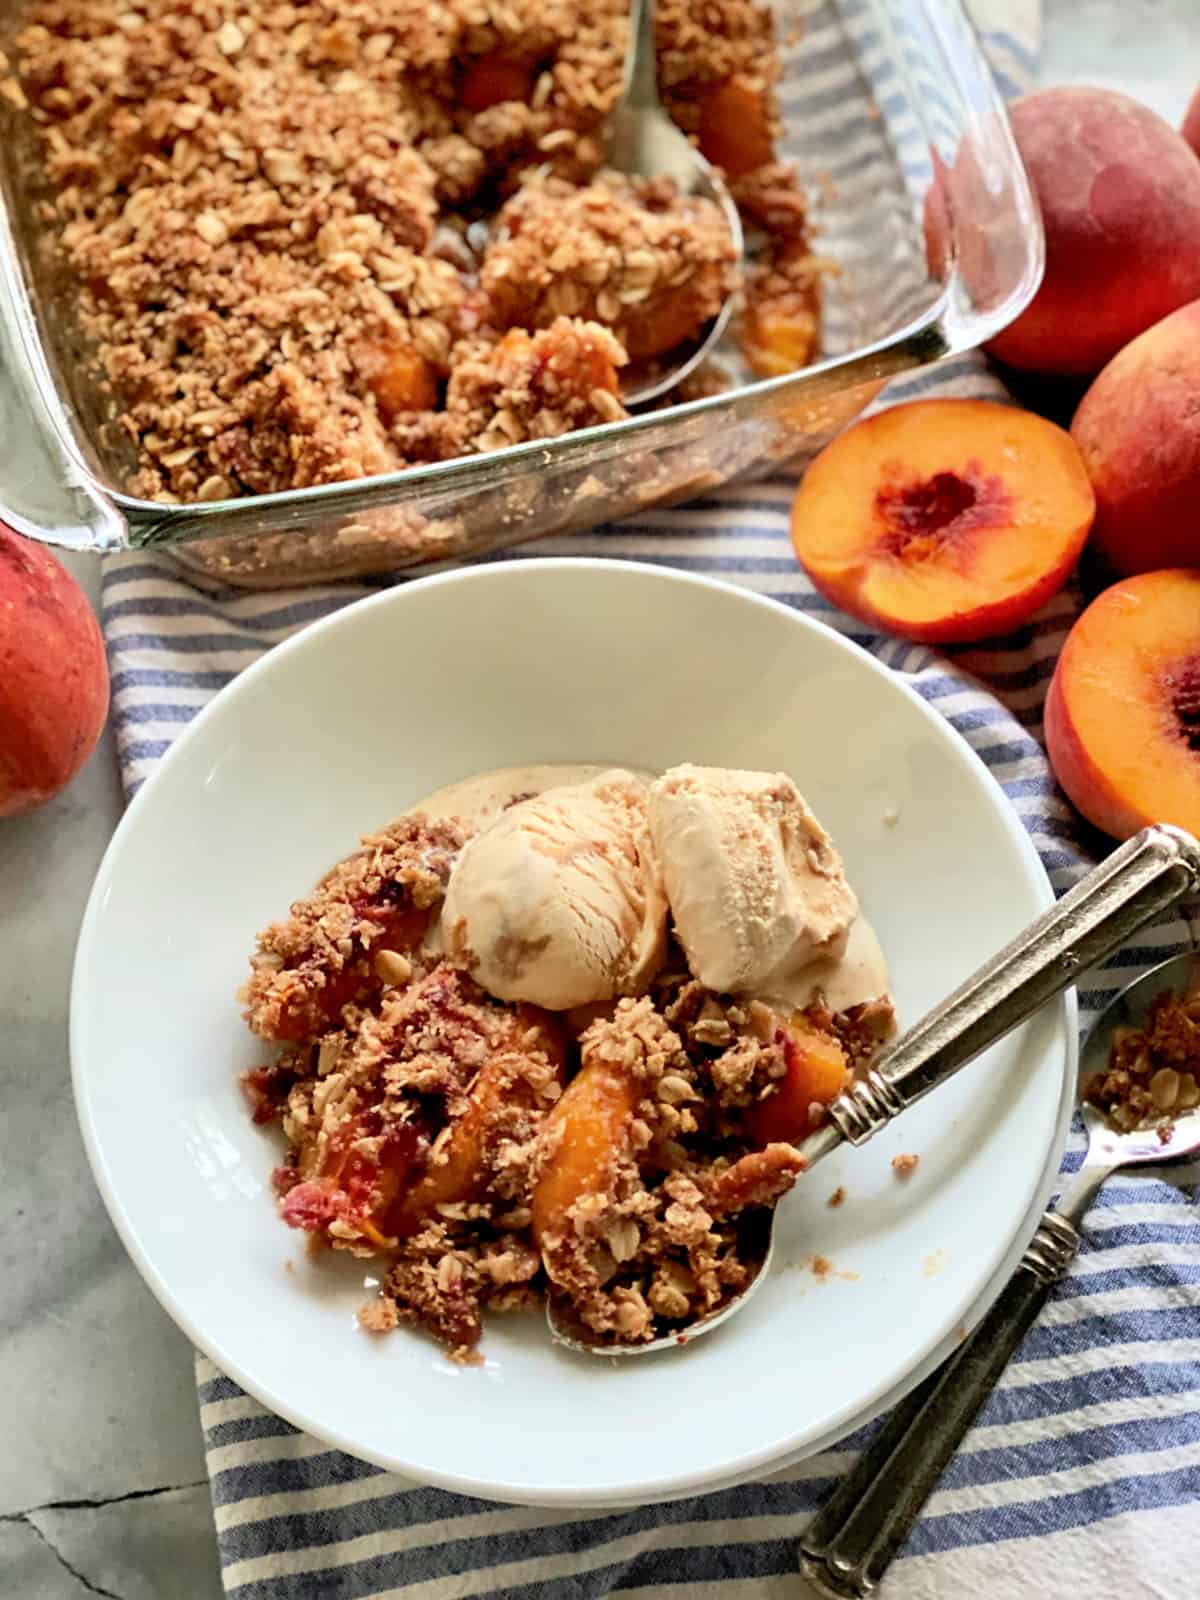 Top view of a white bowl filled with peach crisp, ice cream, a spoon with a glass baking dish filled with peach crisp next to it.